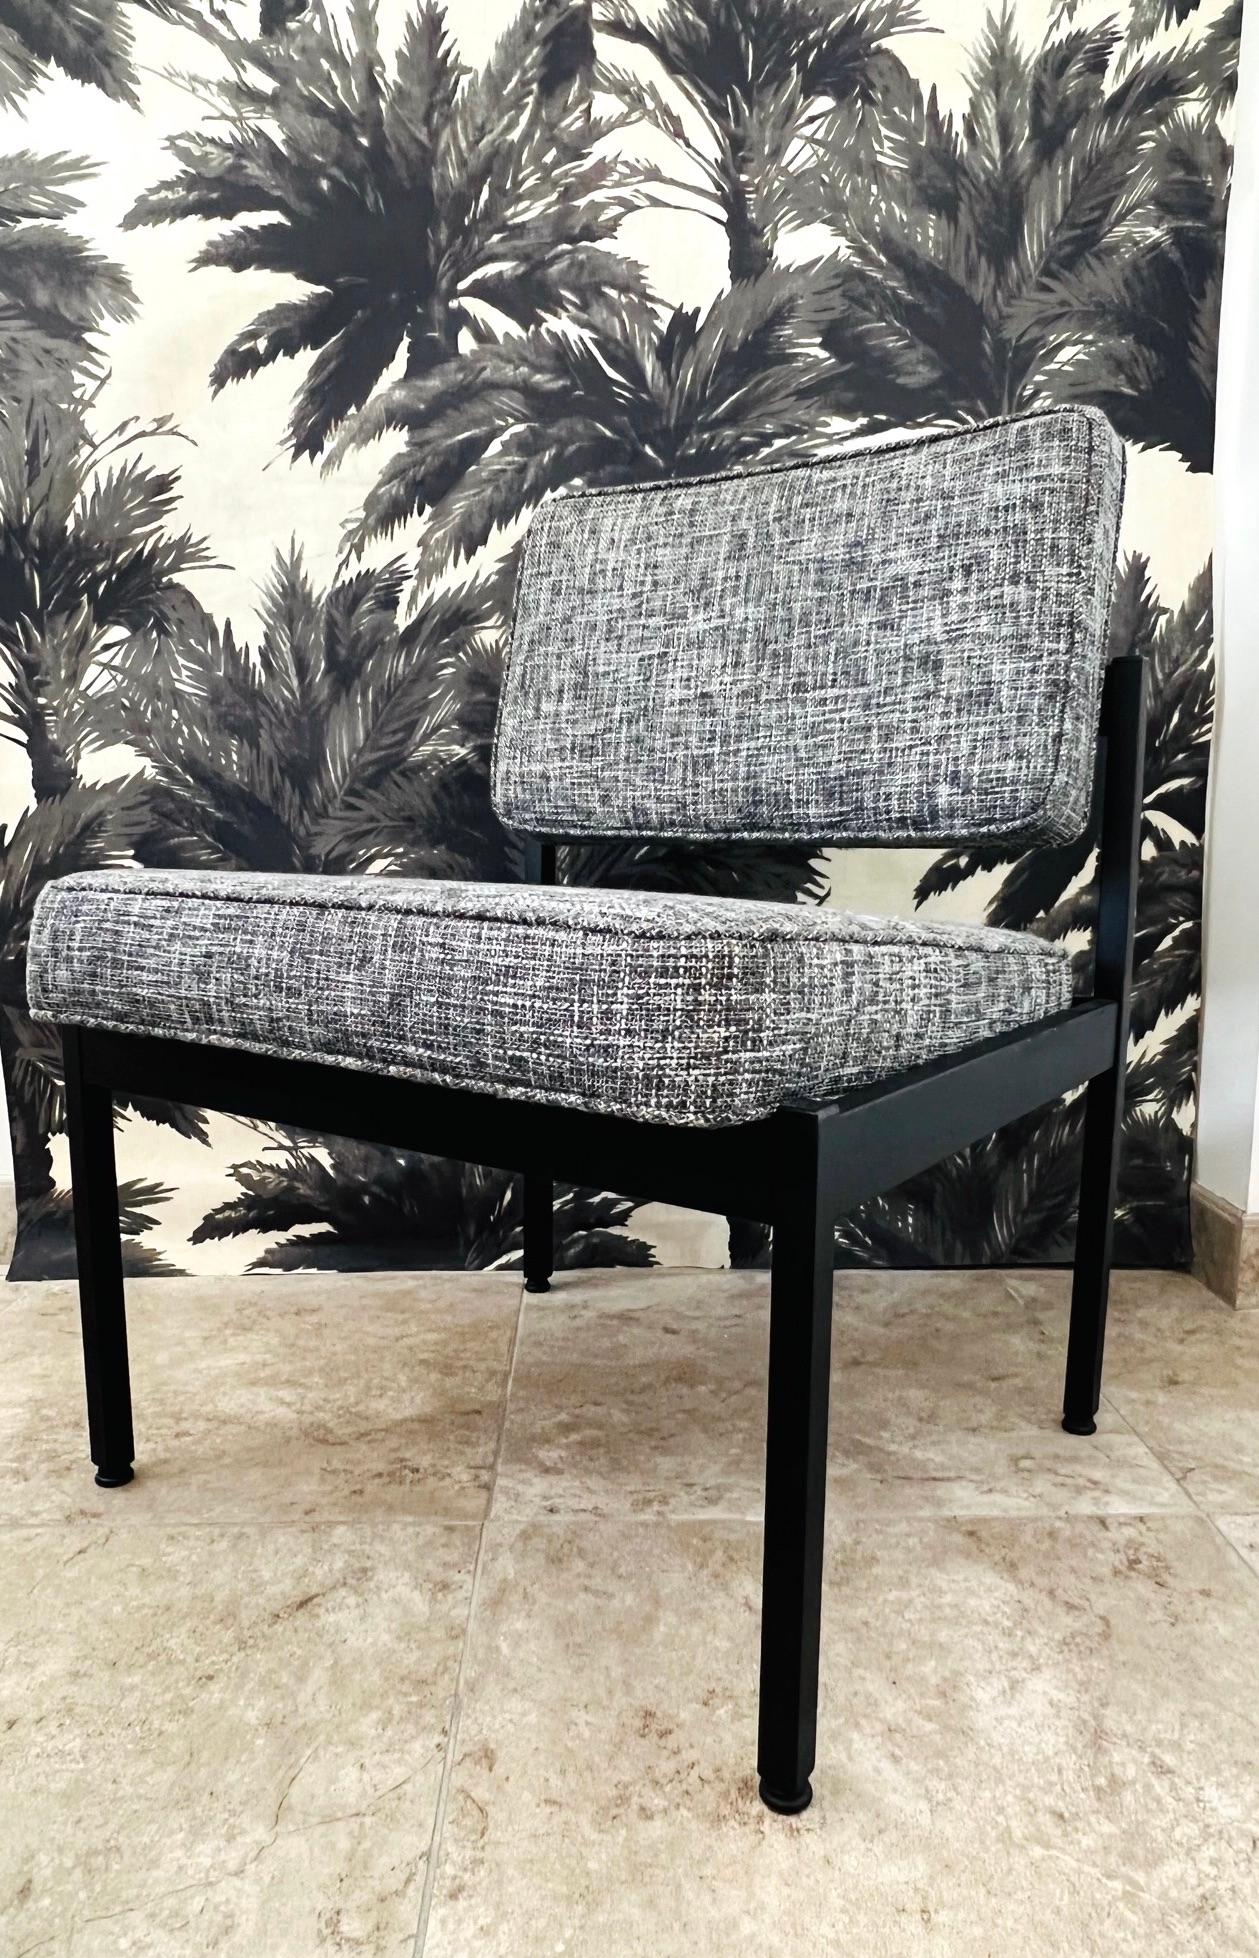 Vintage Knoll Style Chair in Black and Ivory Tweed Upholstery, c. 1970's For Sale 1